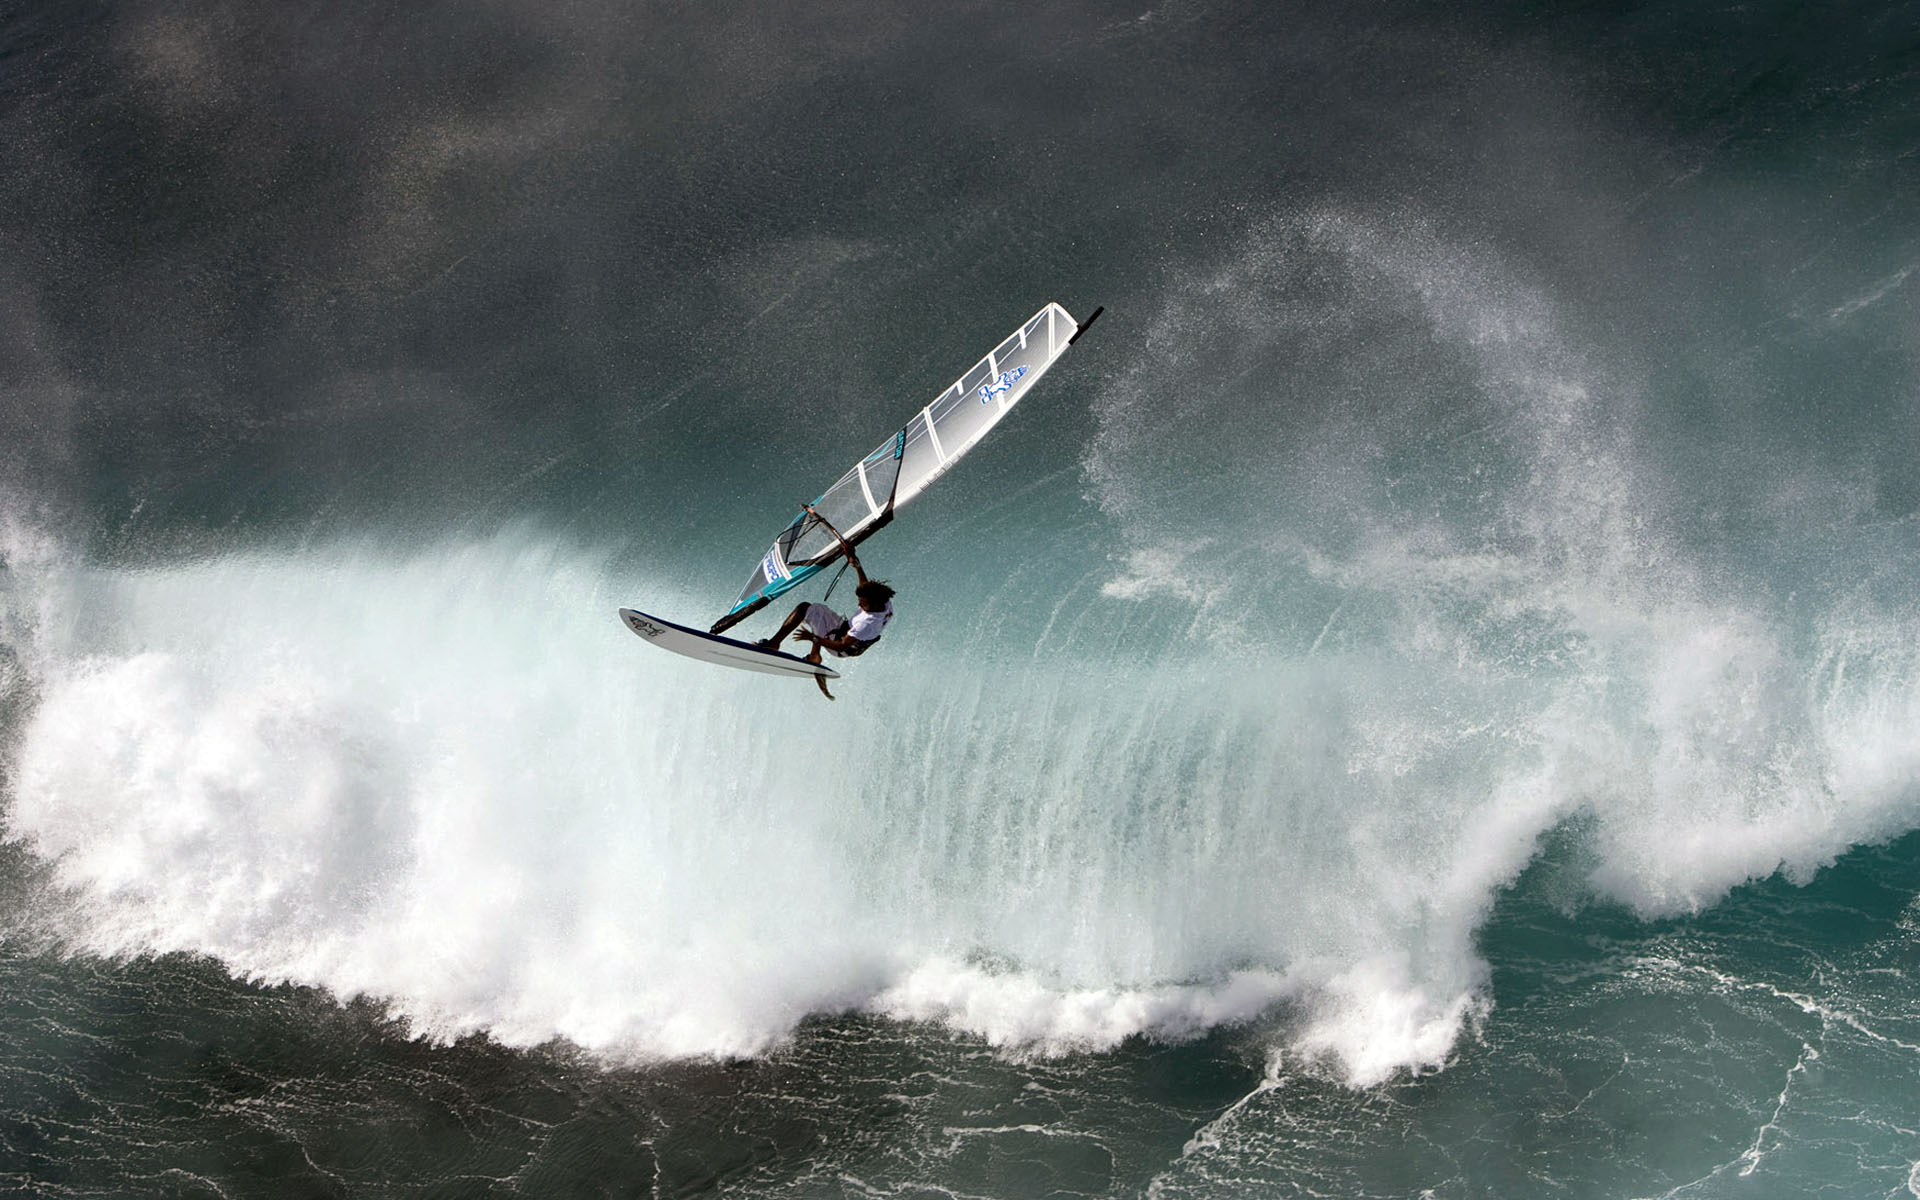 A thrilling windsurfing action scene, capturing the adrenaline and grace of these water sport enthusiasts.